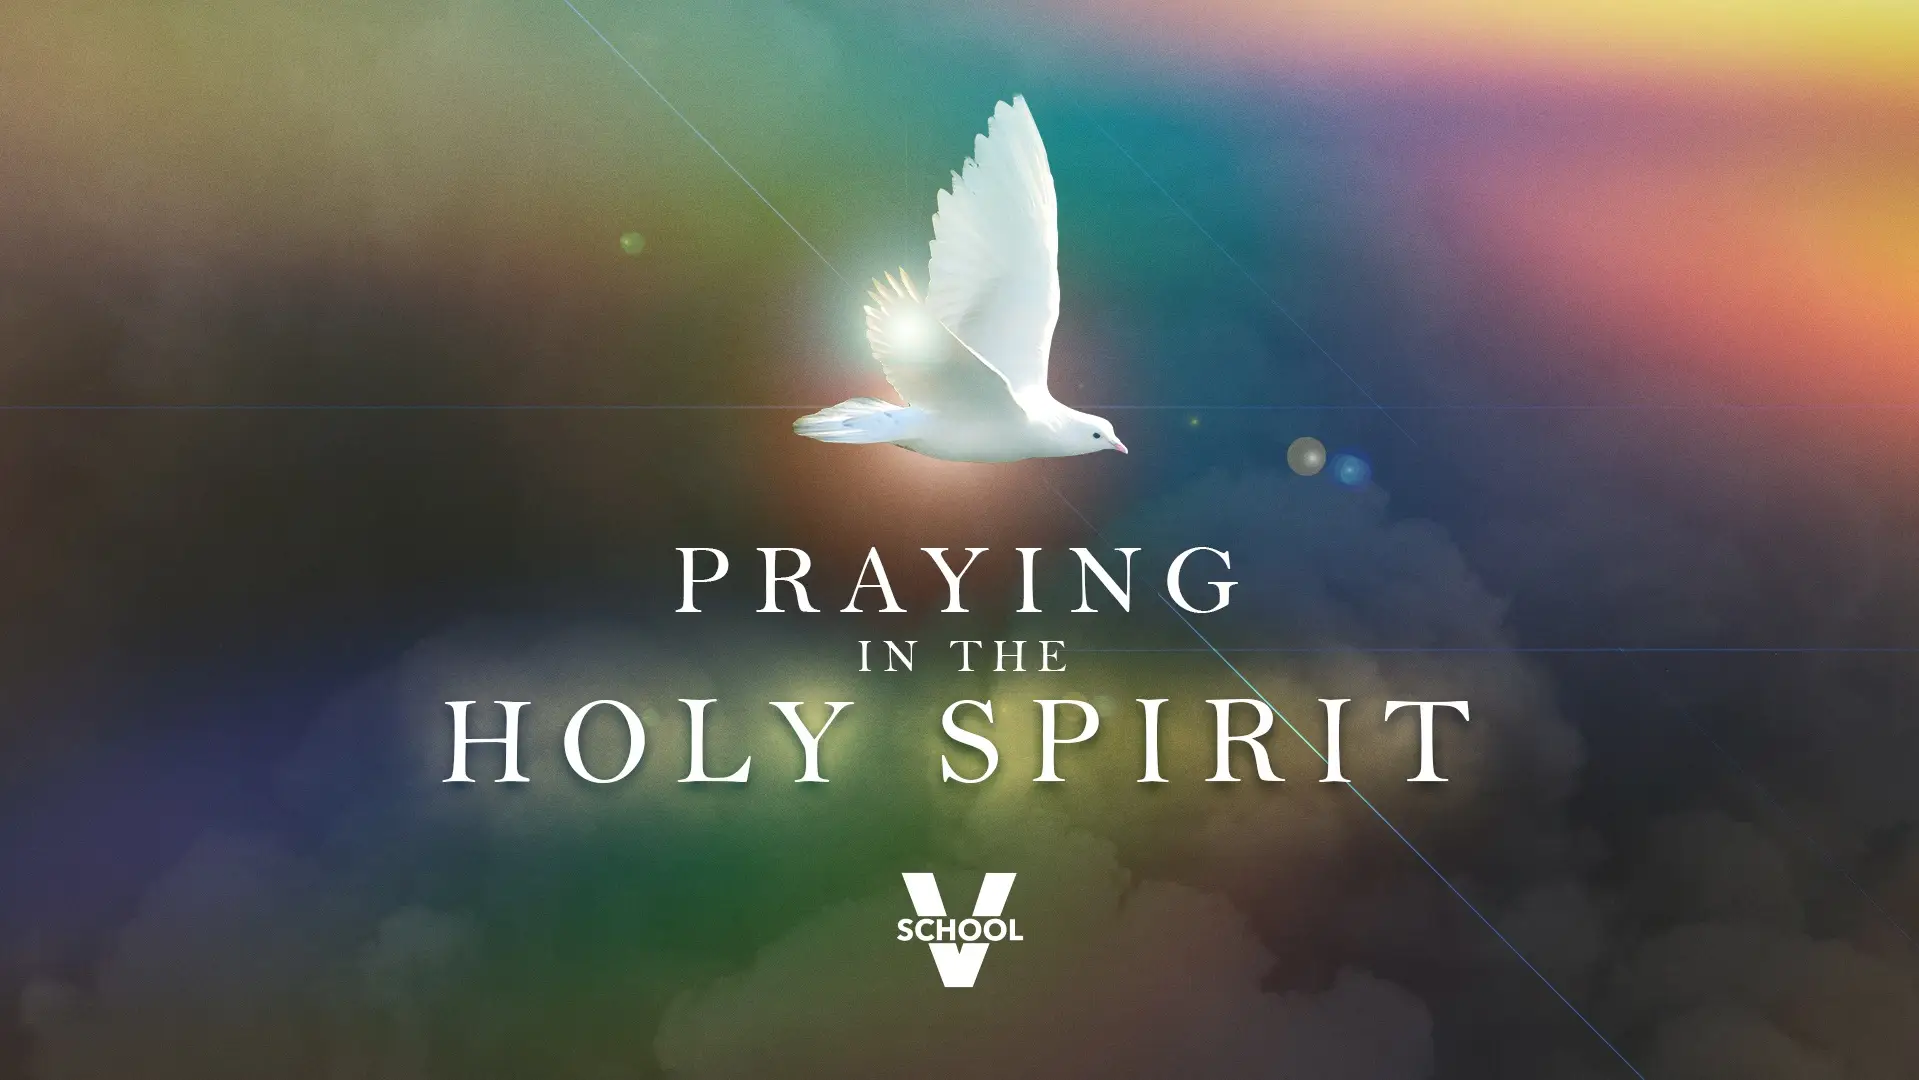 Featured Image for “Praying in the Holy Spirit”